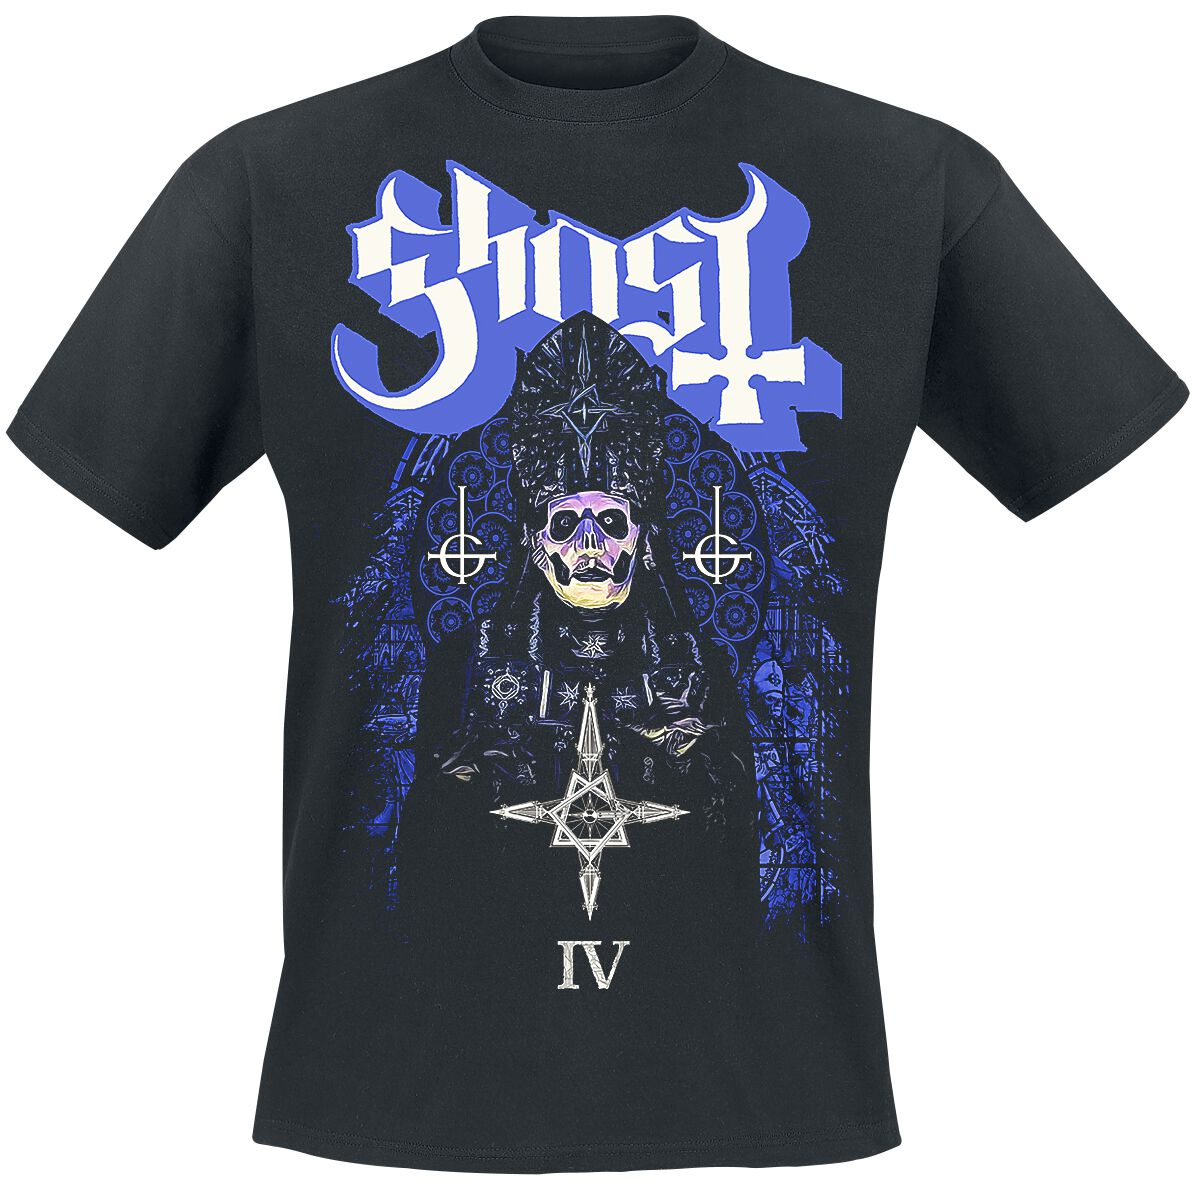 Ghost Stained Glass IV T-Shirt schwarz in S